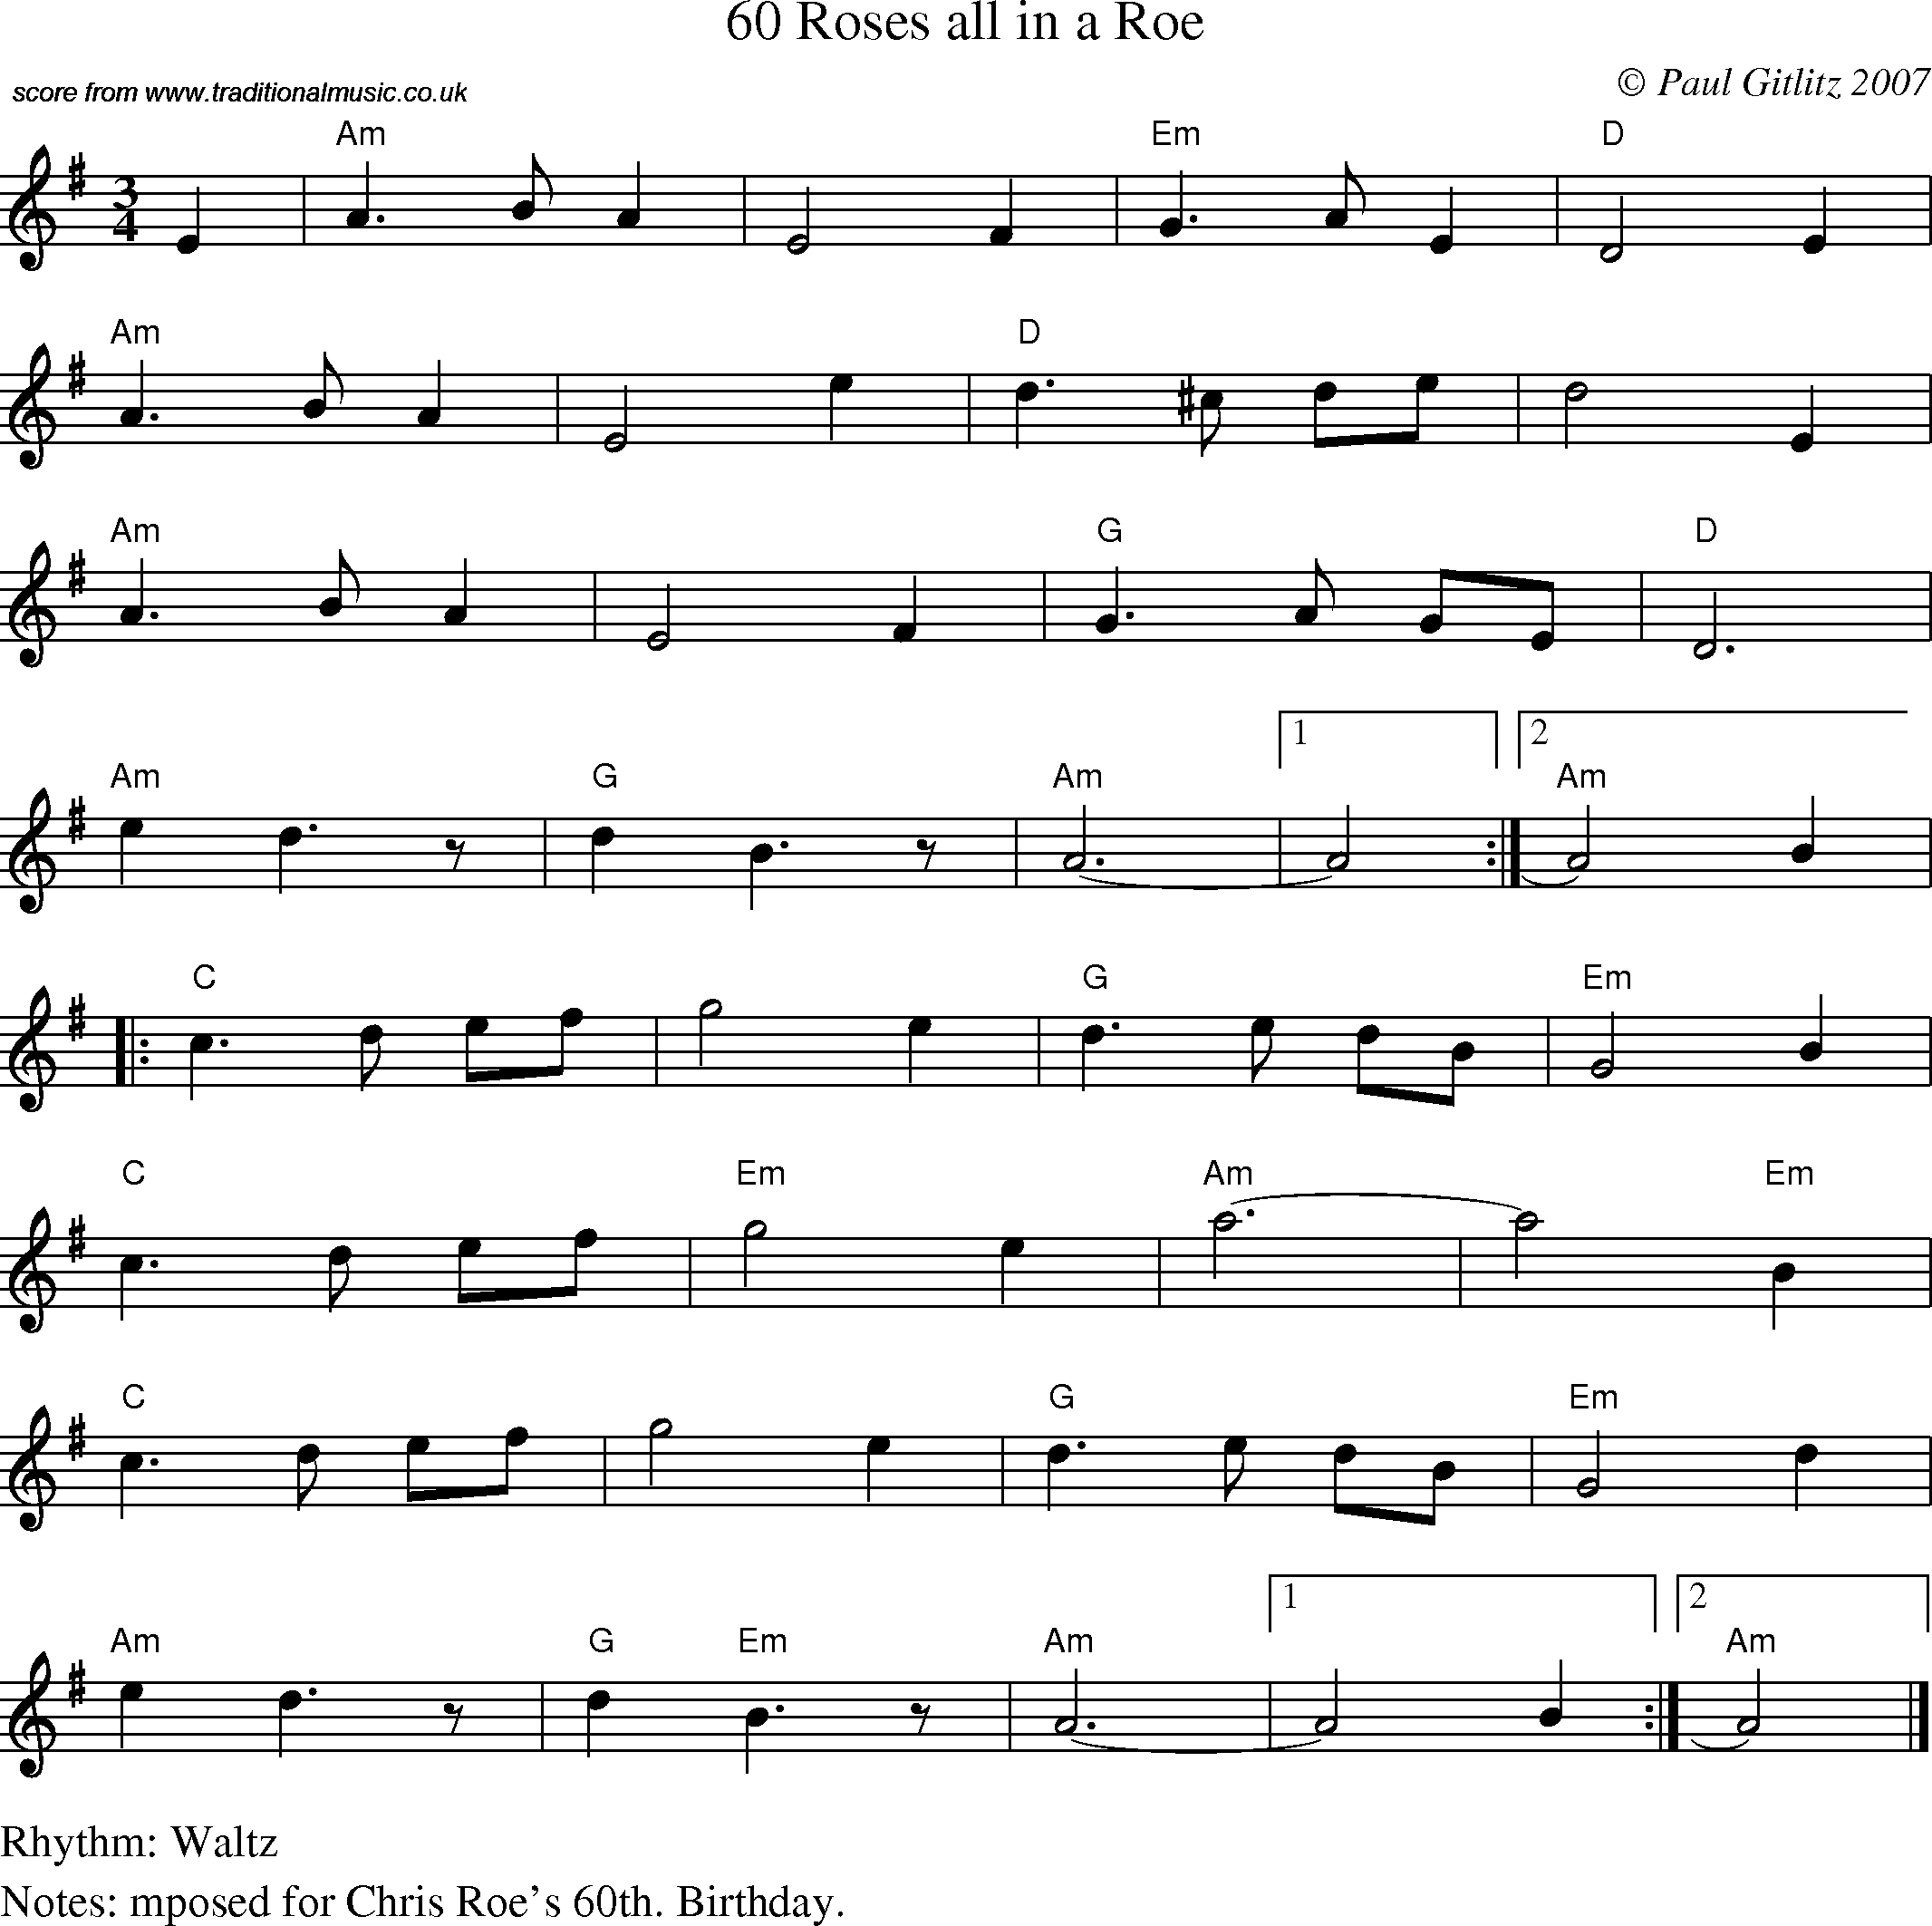 Sheet Music Score for Waltz - 60 Roses all in a Roe